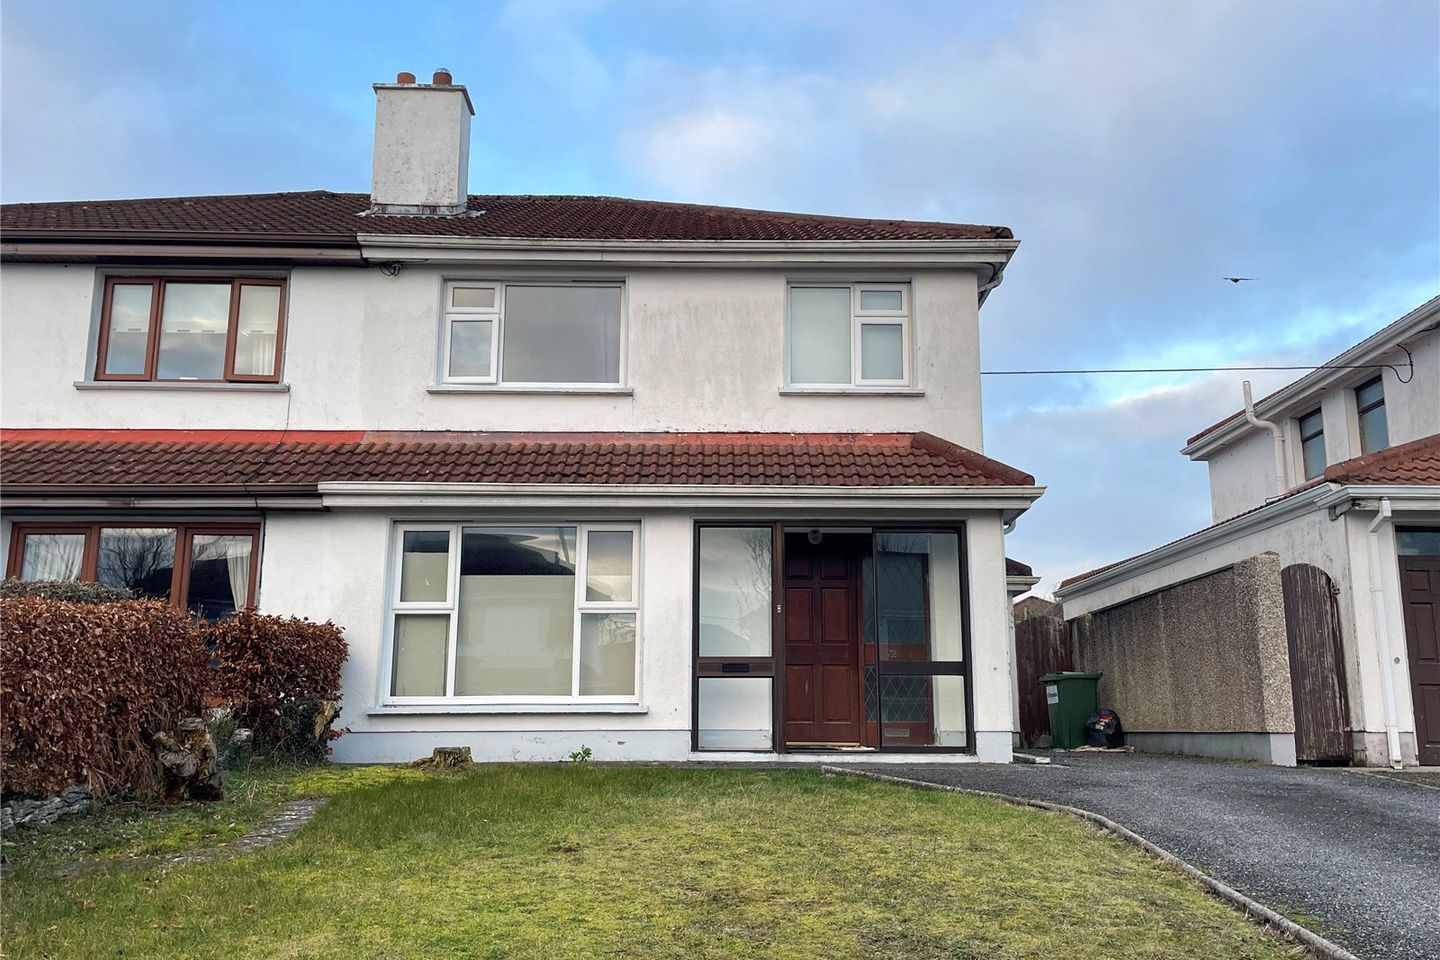 72 The Rise, Knocknacarra, Co. Galway, H91FNH7